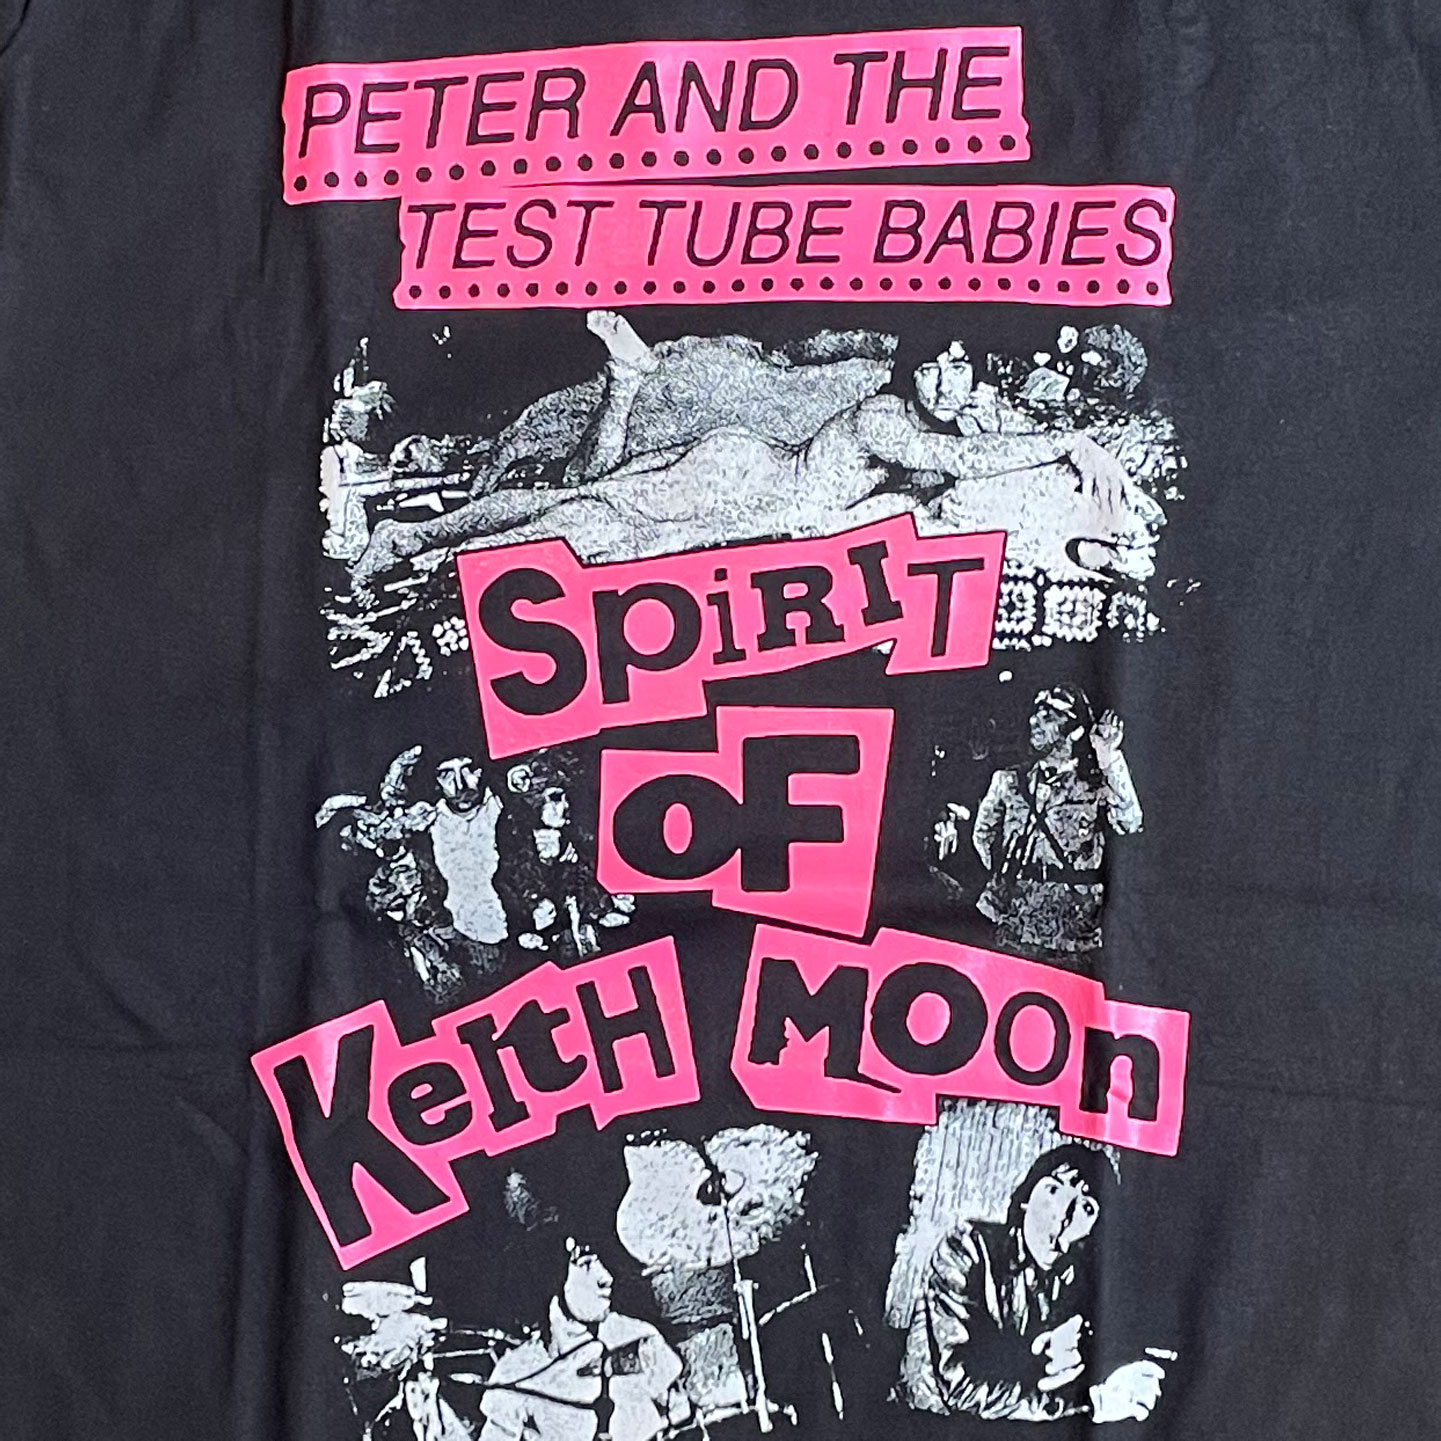 PETER AND THE TEST TUBE BABIES Tシャツ spirit of keith moon